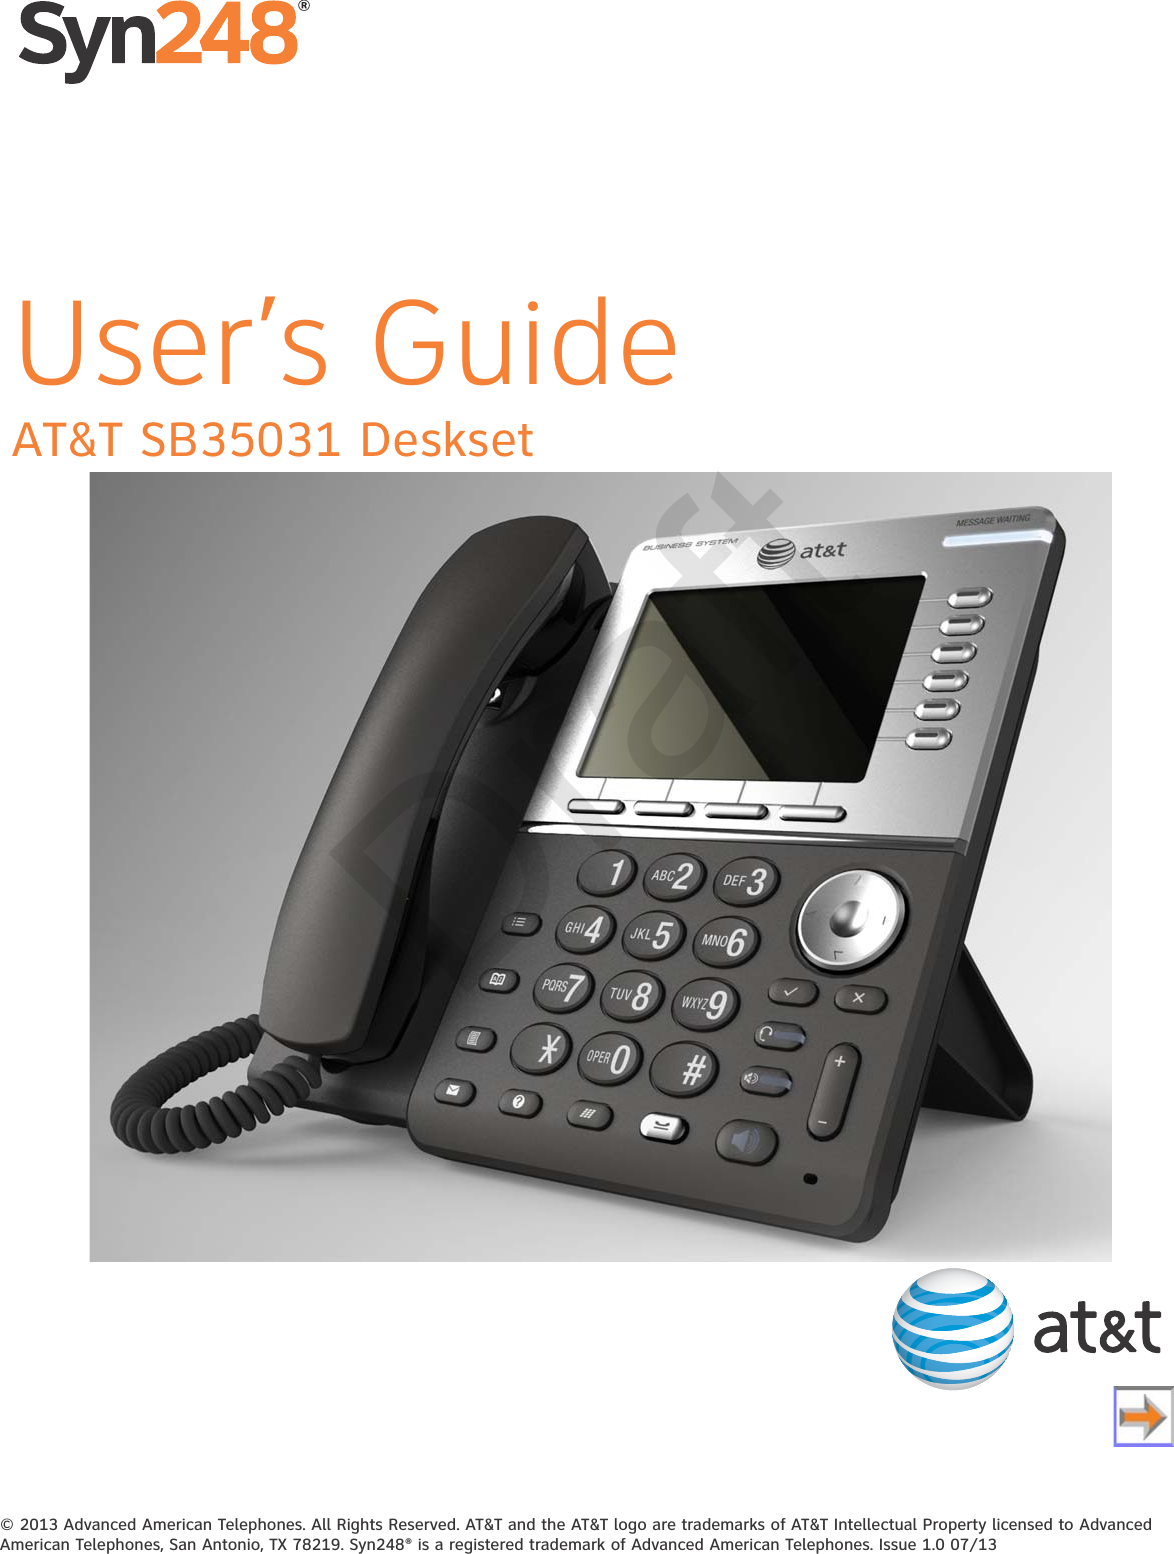 © 2013 Advanced American Telephones. All Rights Reserved. AT&amp;T and the AT&amp;T logo are trademarks of AT&amp;T Intellectual Property licensed to Advanced American Telephones, San Antonio, TX 78219. Syn248® is a registered trademark of Advanced American Telephones. Issue 1.0 07/13AT&amp;T SB35031 Deskset®User’s GuideDraft